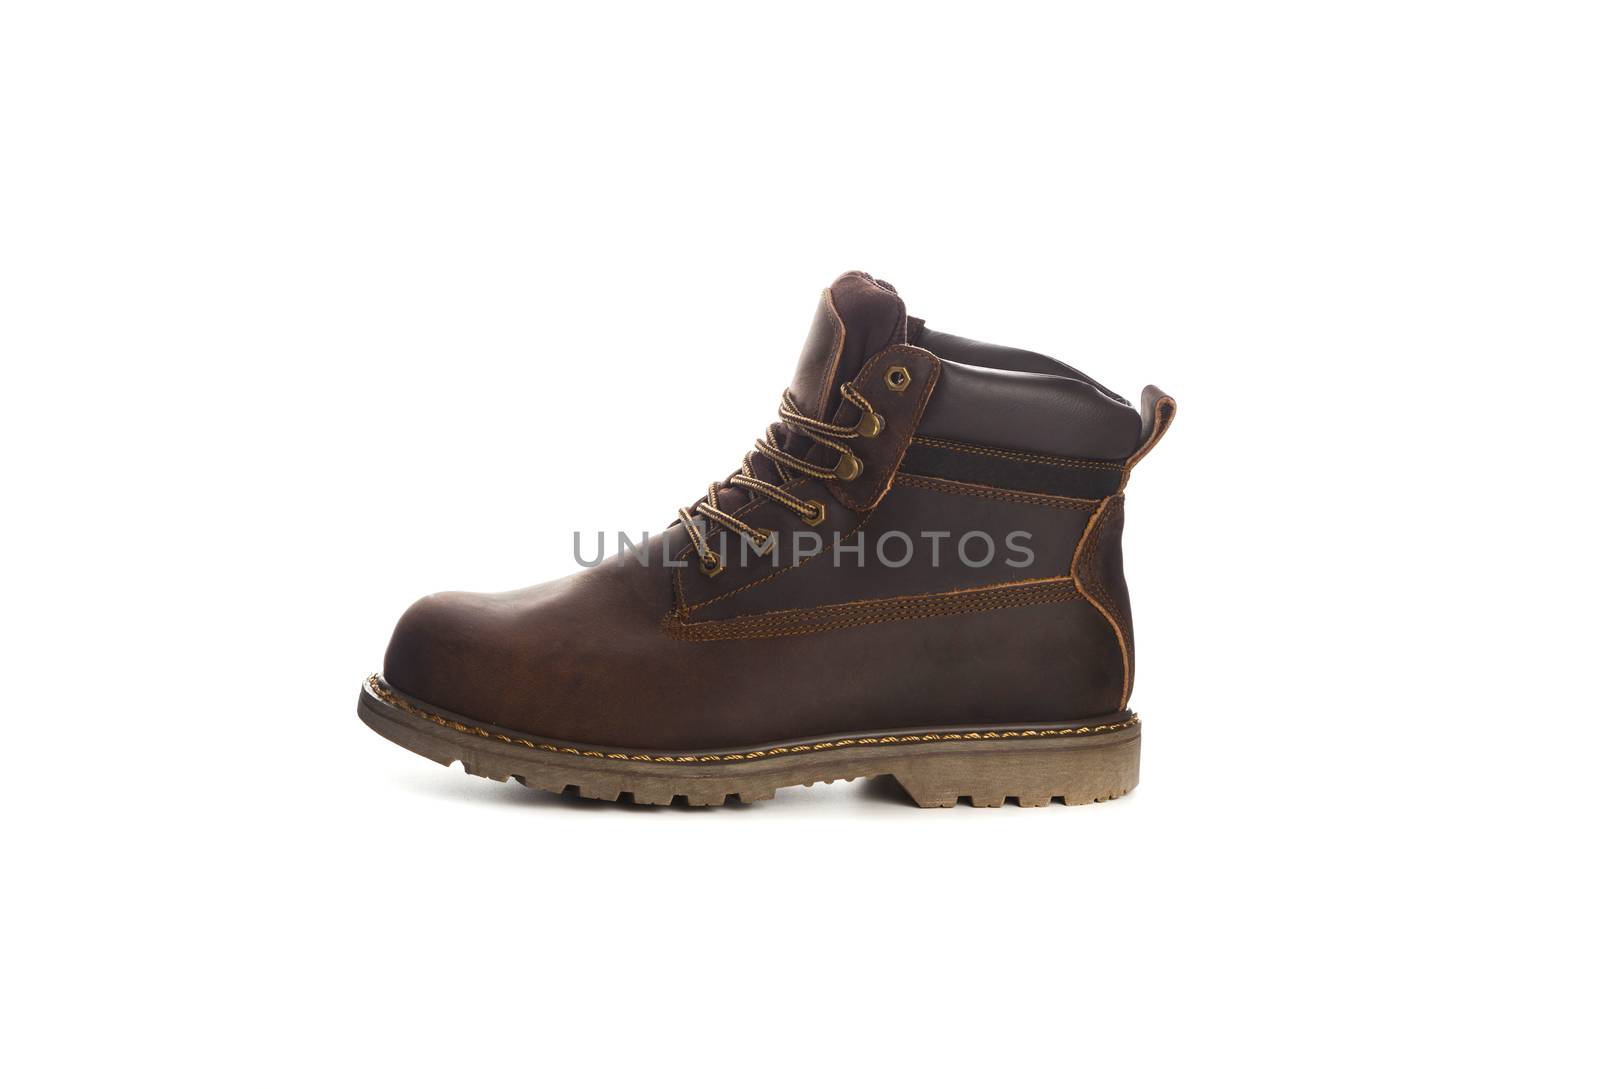 Man ankle boots, brown color, with nubuck leather by SlayCer